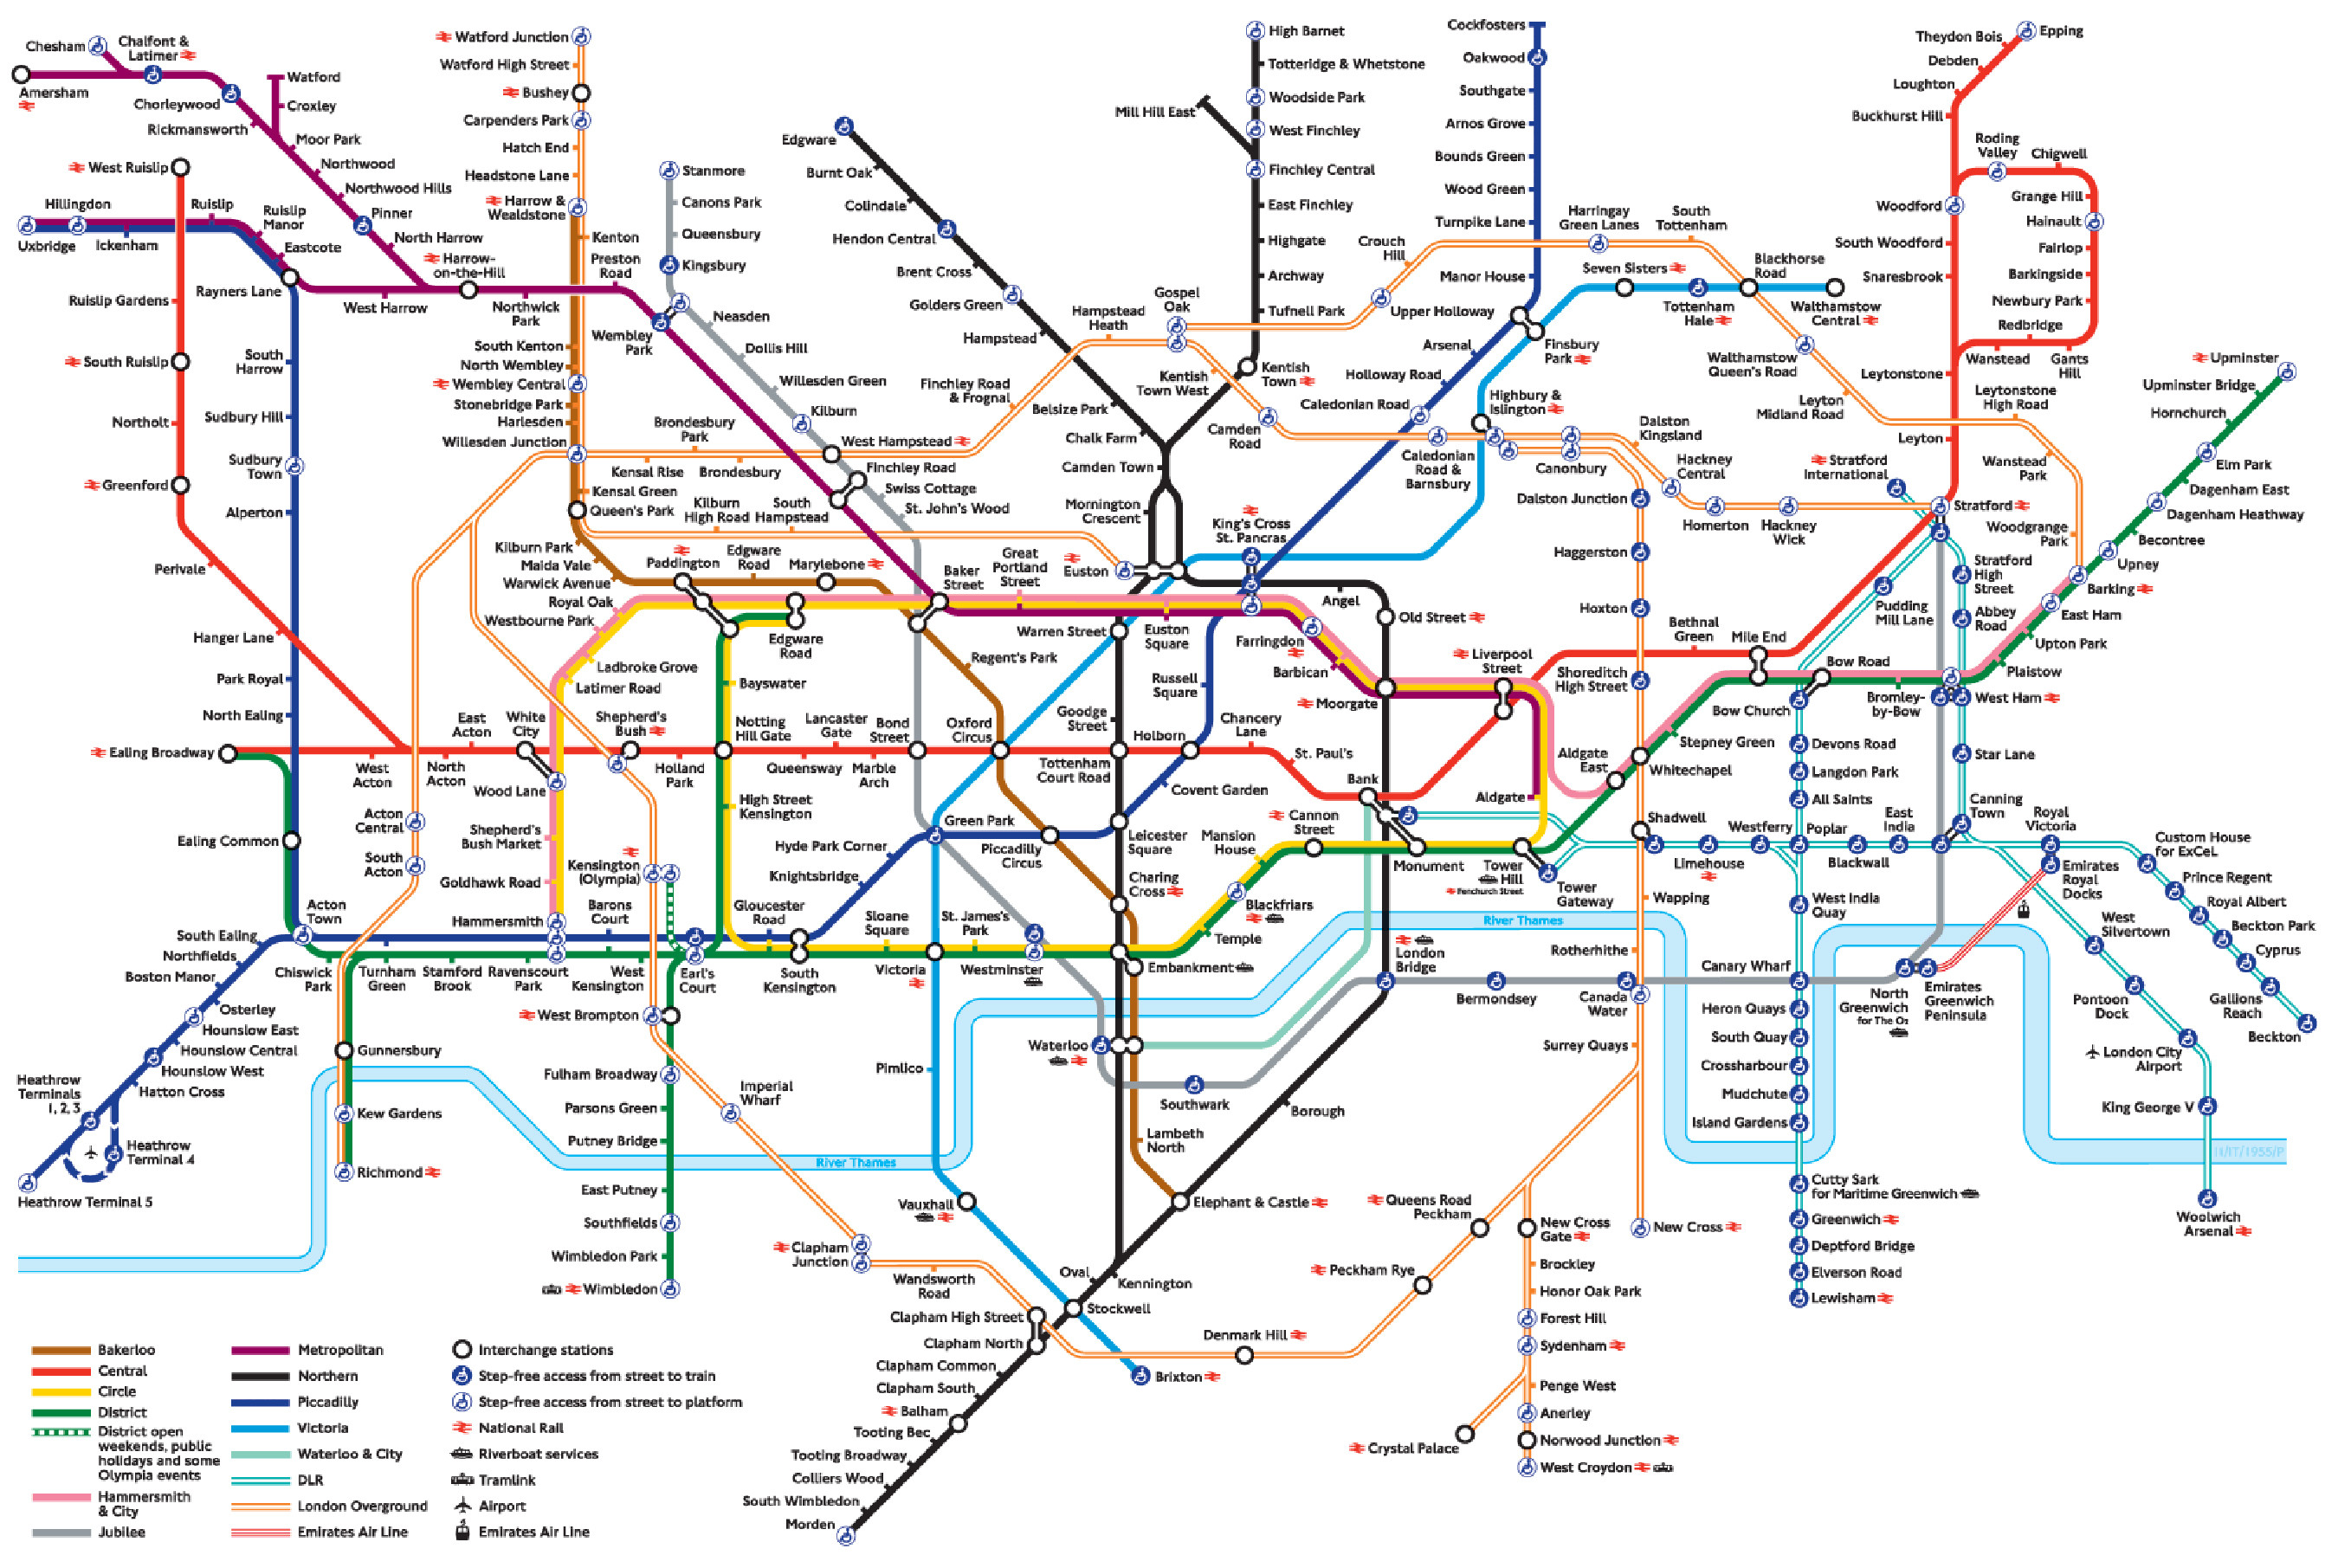 london-tube-map-and-zones-2015-chameleon-web-services